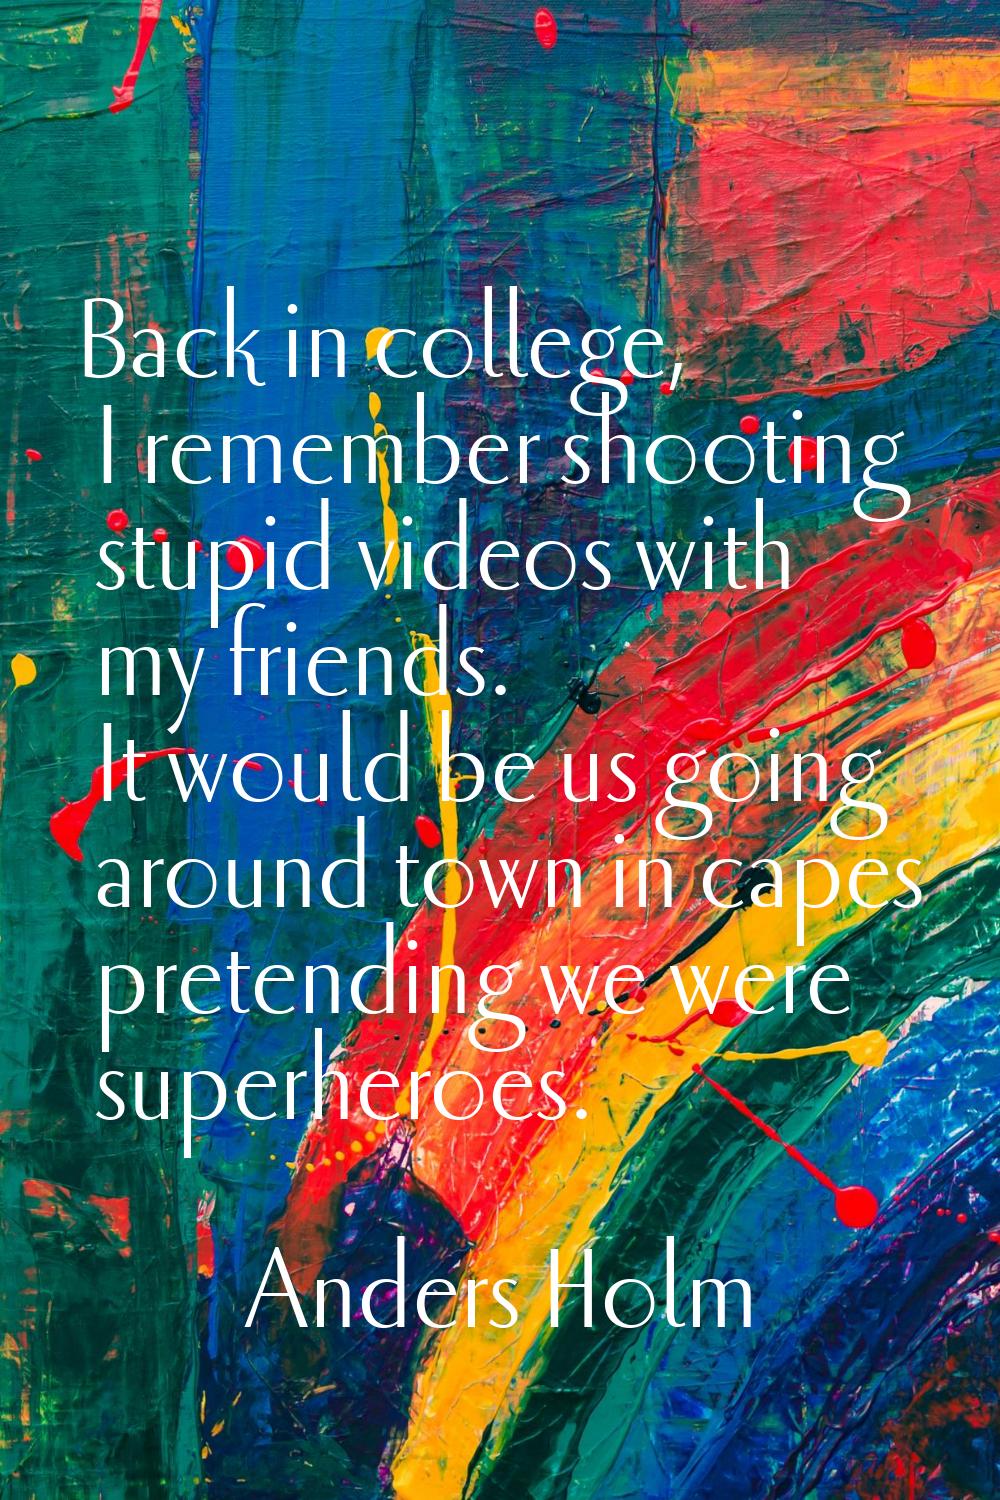 Back in college, I remember shooting stupid videos with my friends. It would be us going around tow